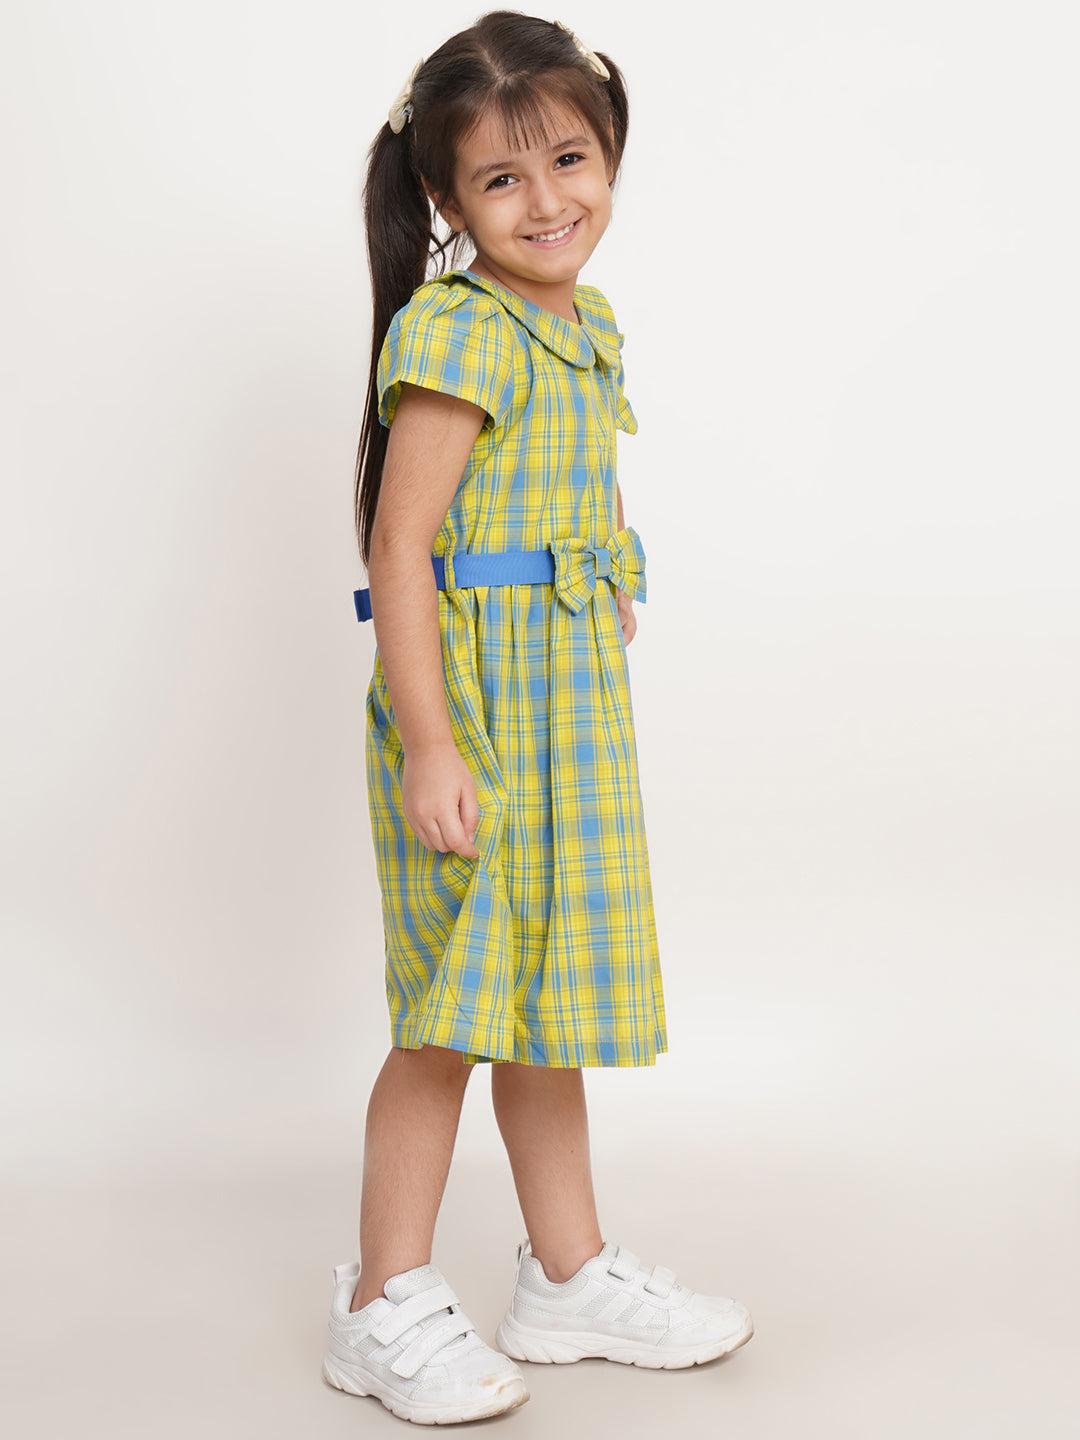 CREATIVE KID'S Girl Blue & Yellow Checked A-Line Dress